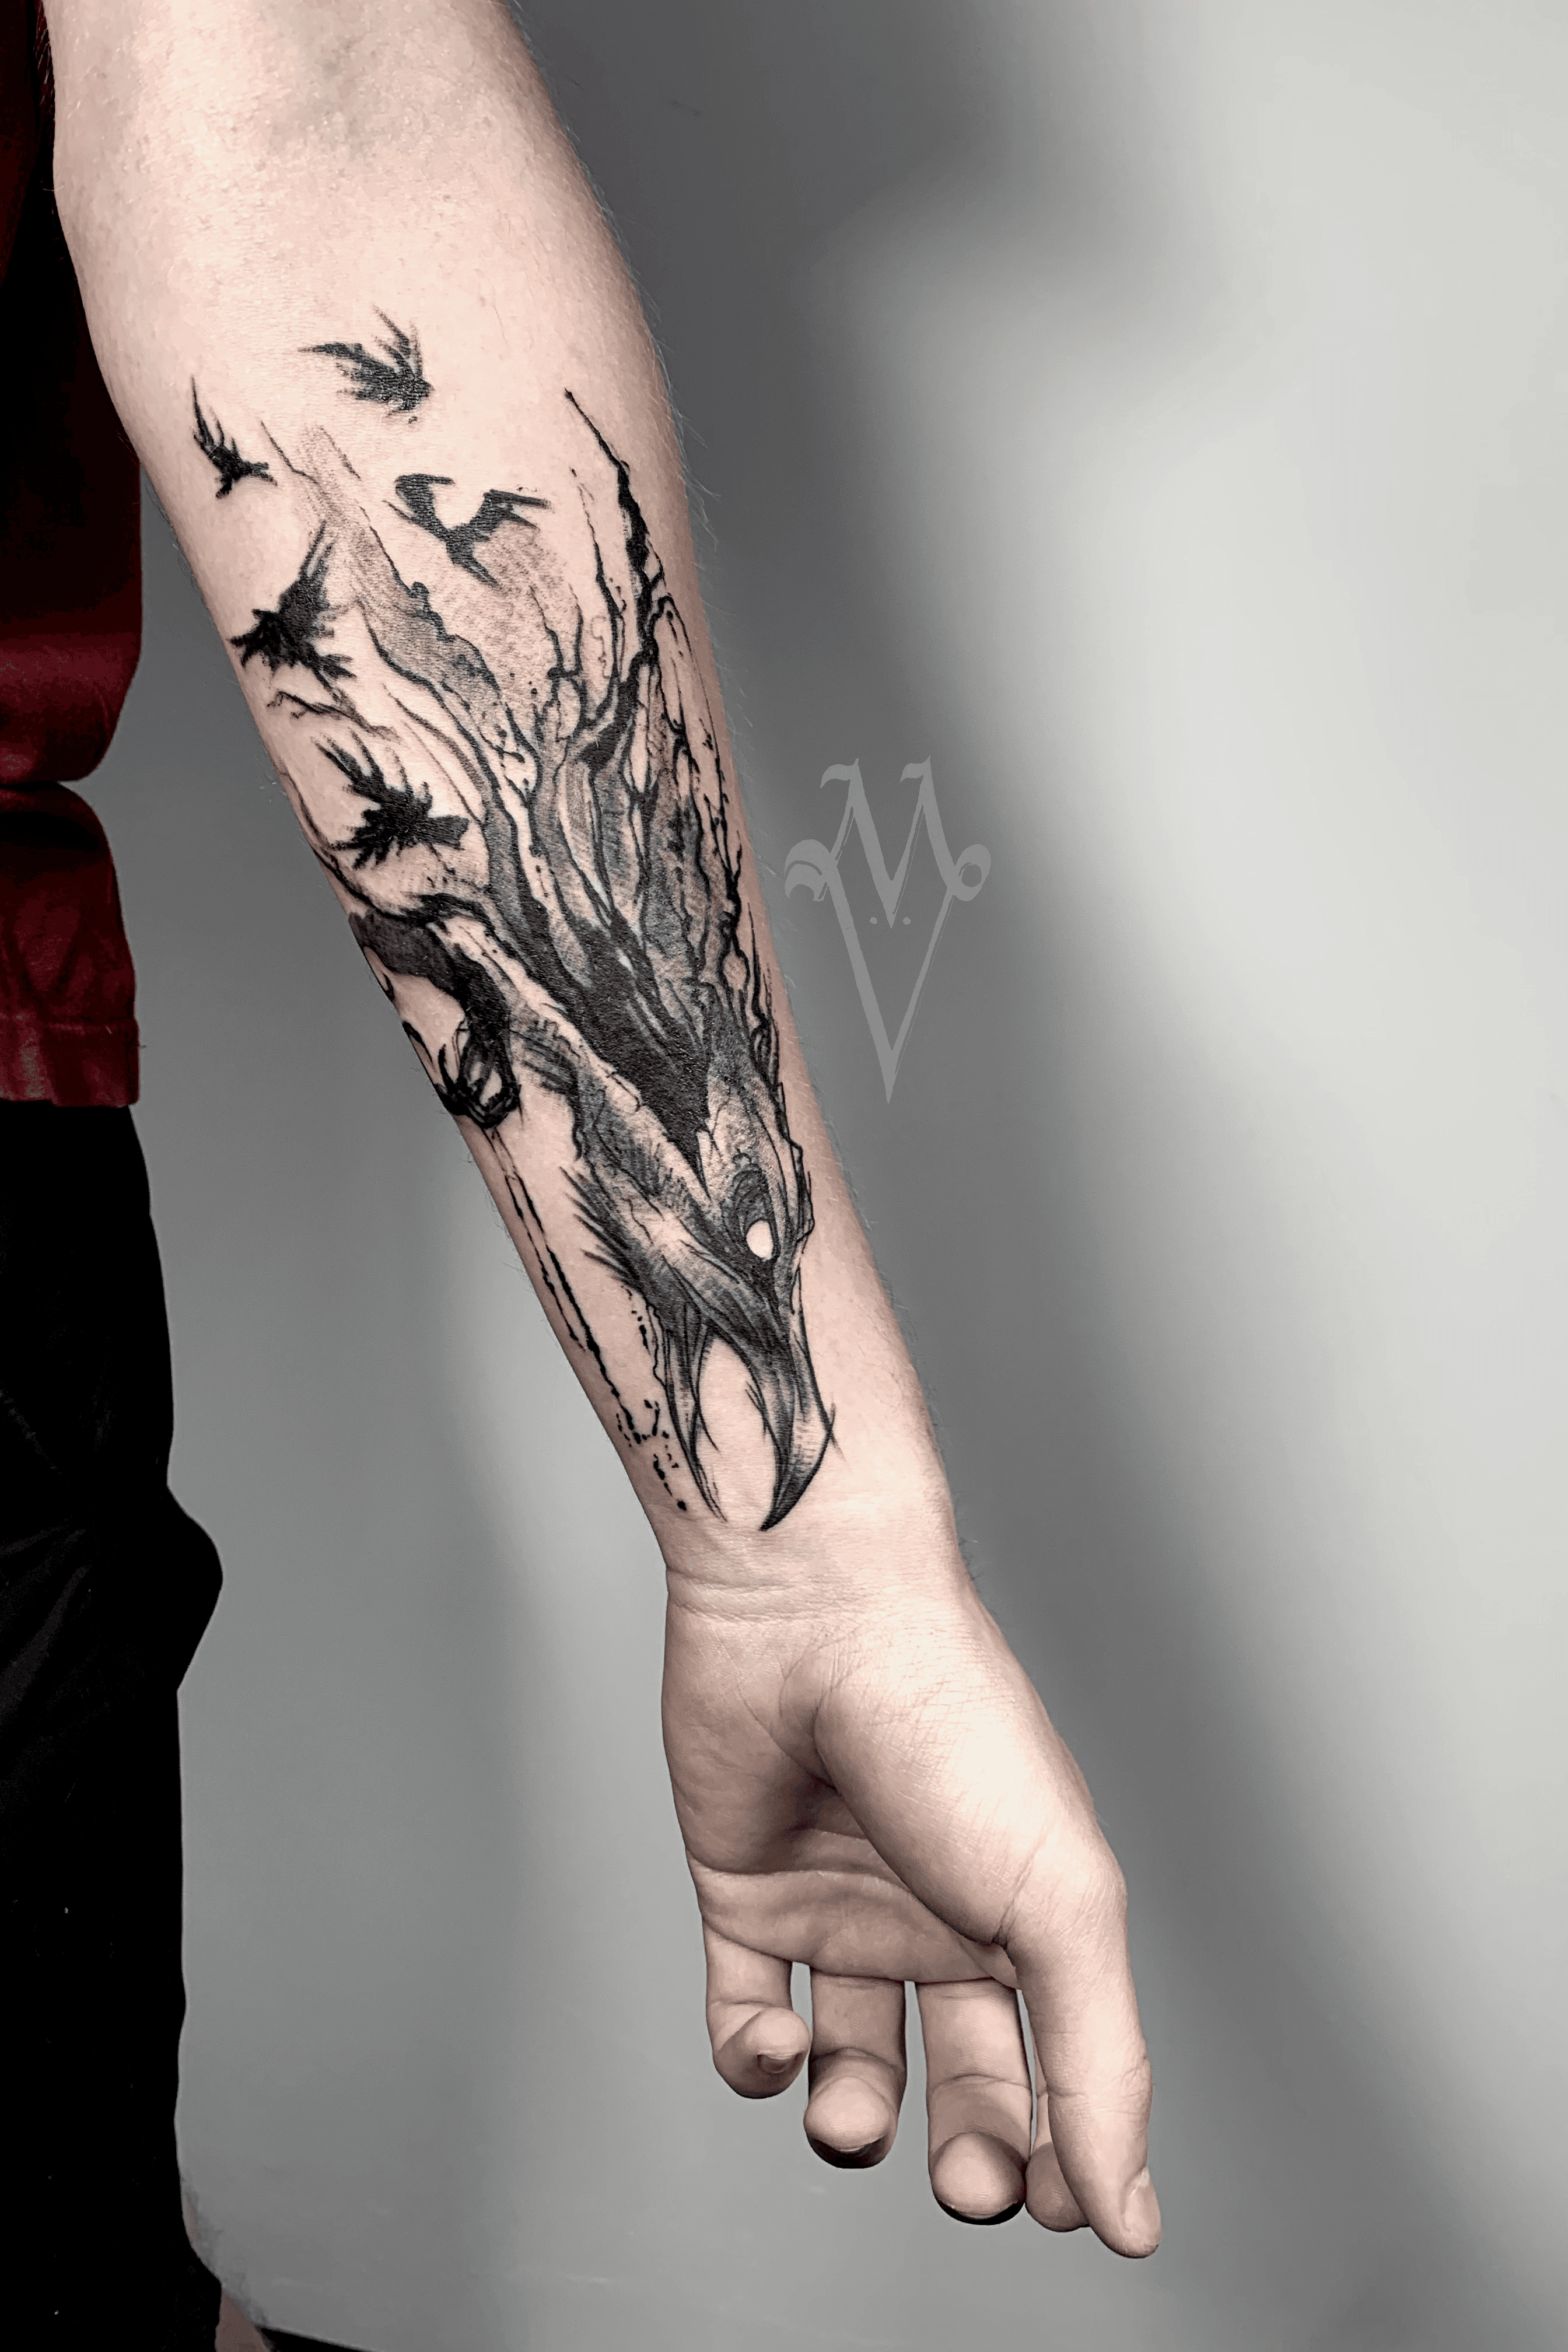 60 Coolest Forearm Tattoo Ideas Youll Instantly Love  Cool forearm  tattoos Forearm tattoos Forearm tattoo design